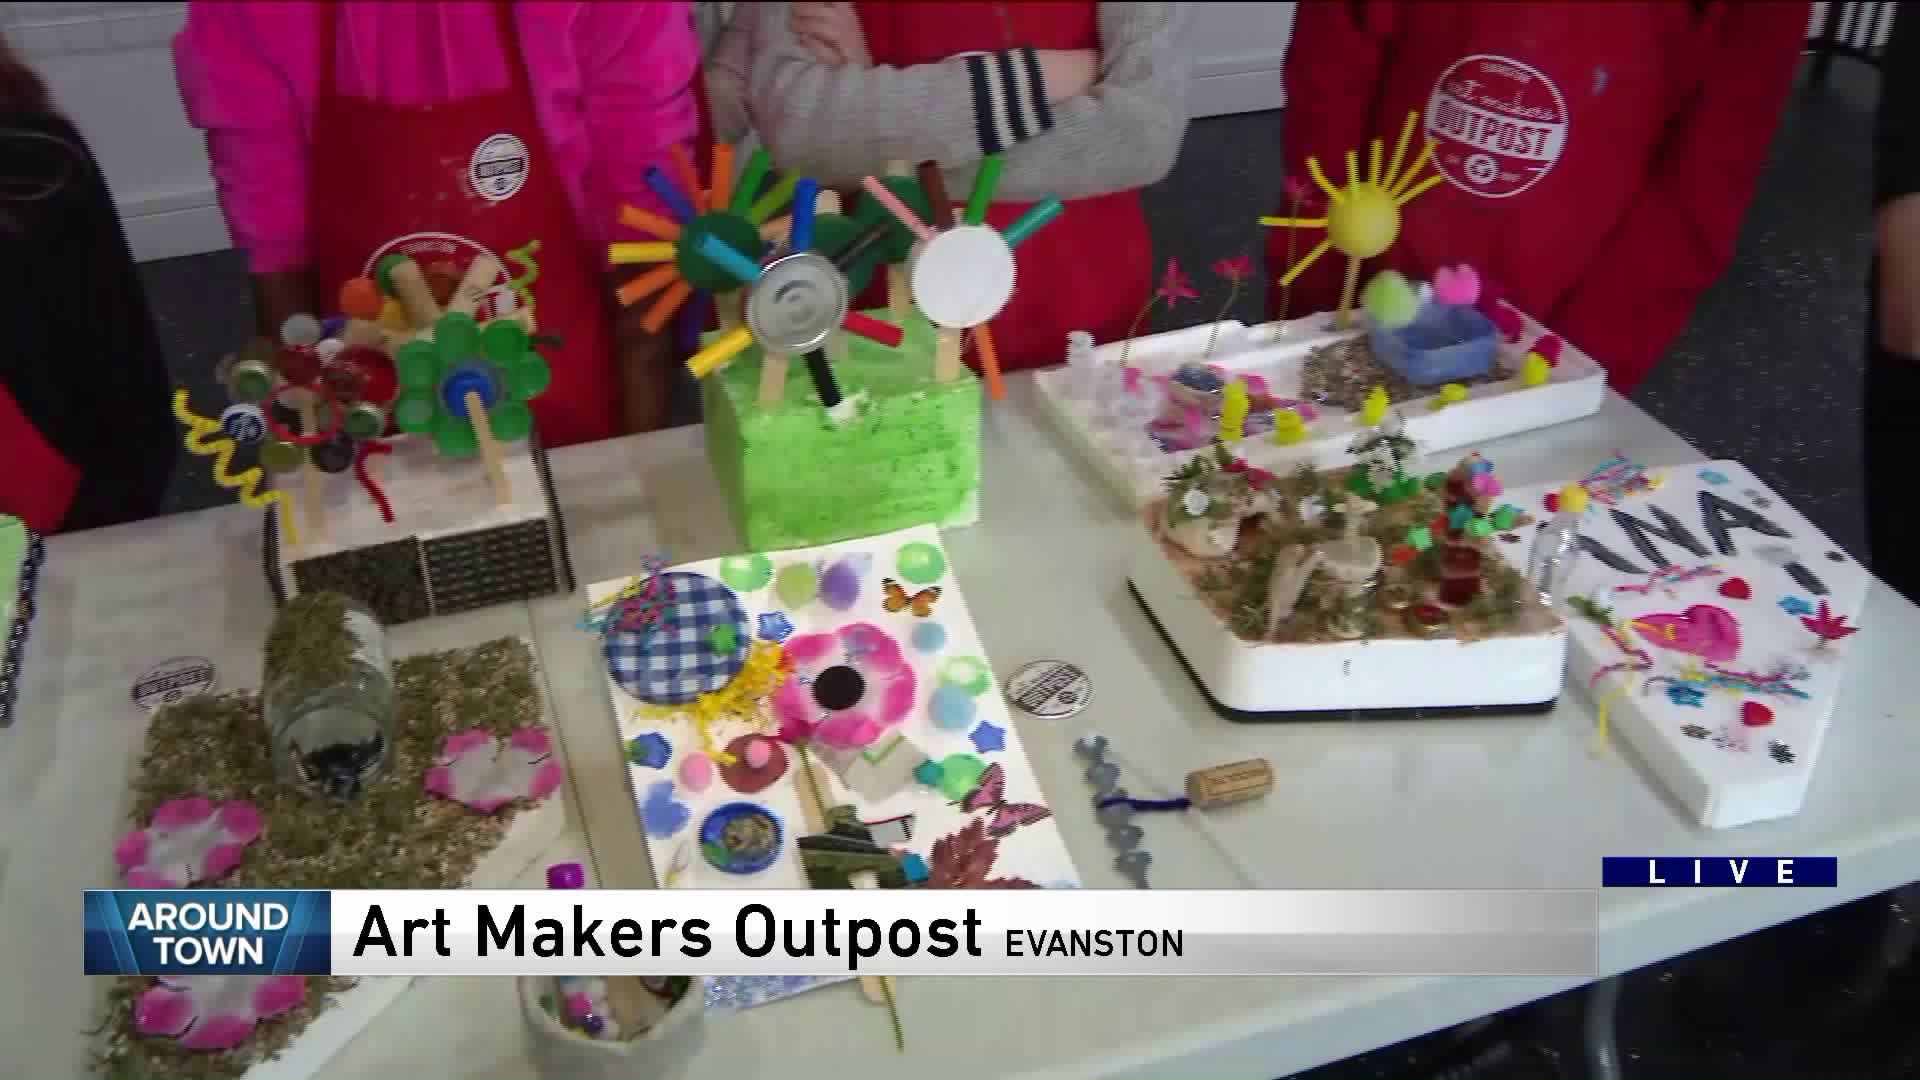 Around Town checks out Art Makers Outpost